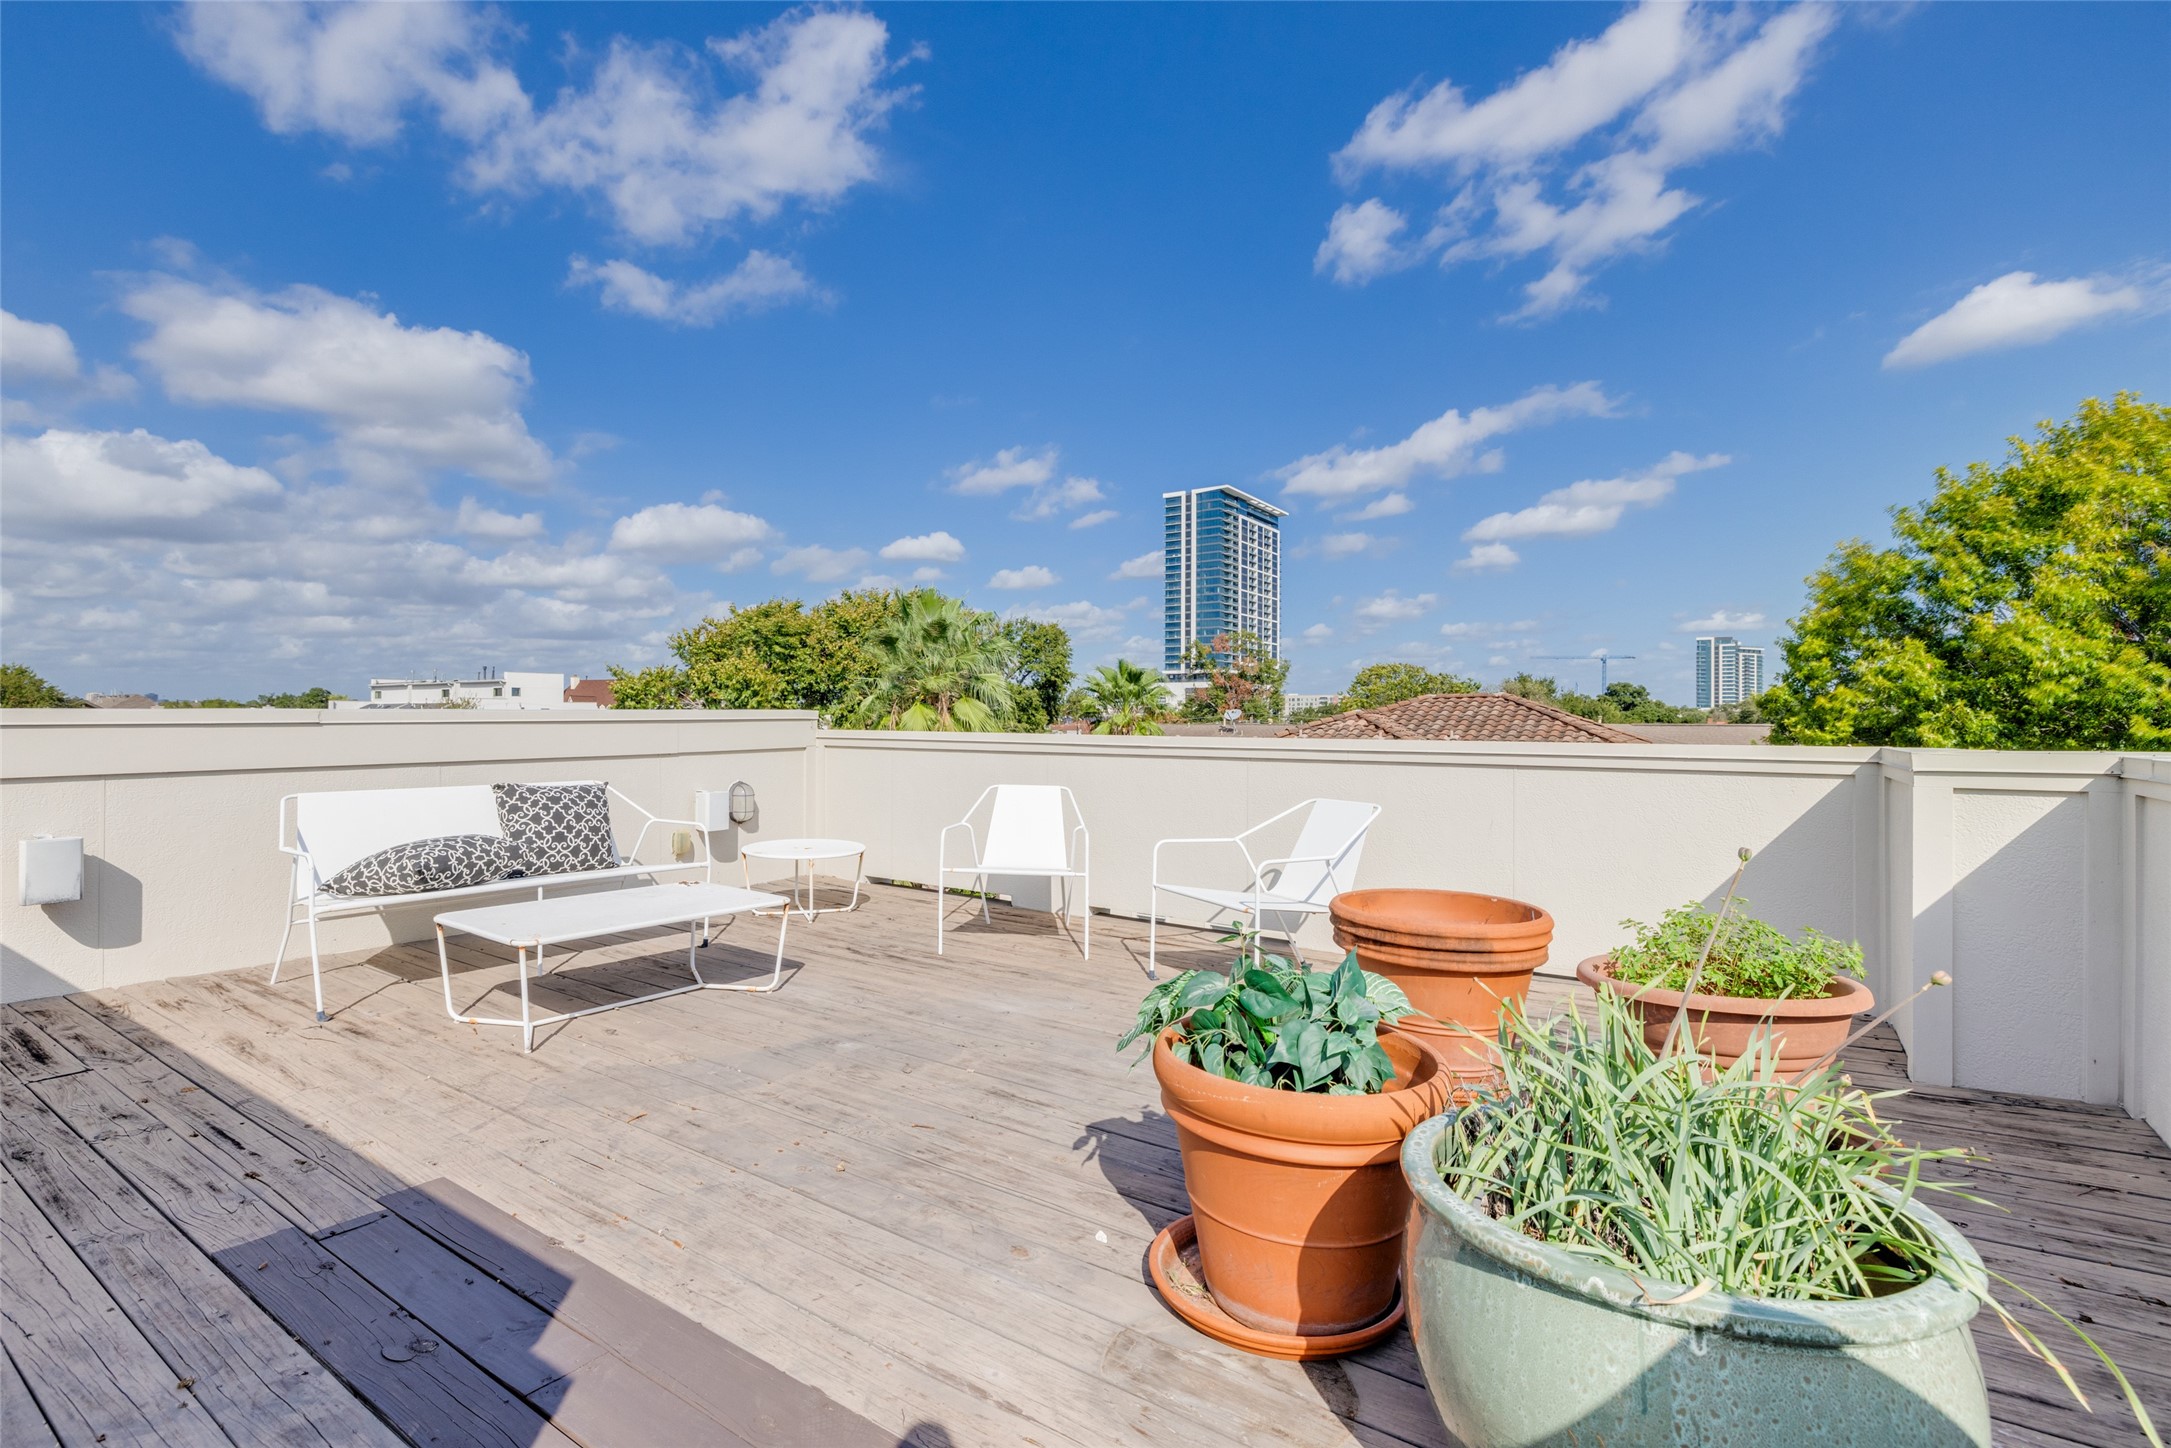 Enjoy the wonderful panoramic views of Houston in this peaceful huge rooftop terrace, gas & water connections, decorative lighting, wood deck replaced 2017